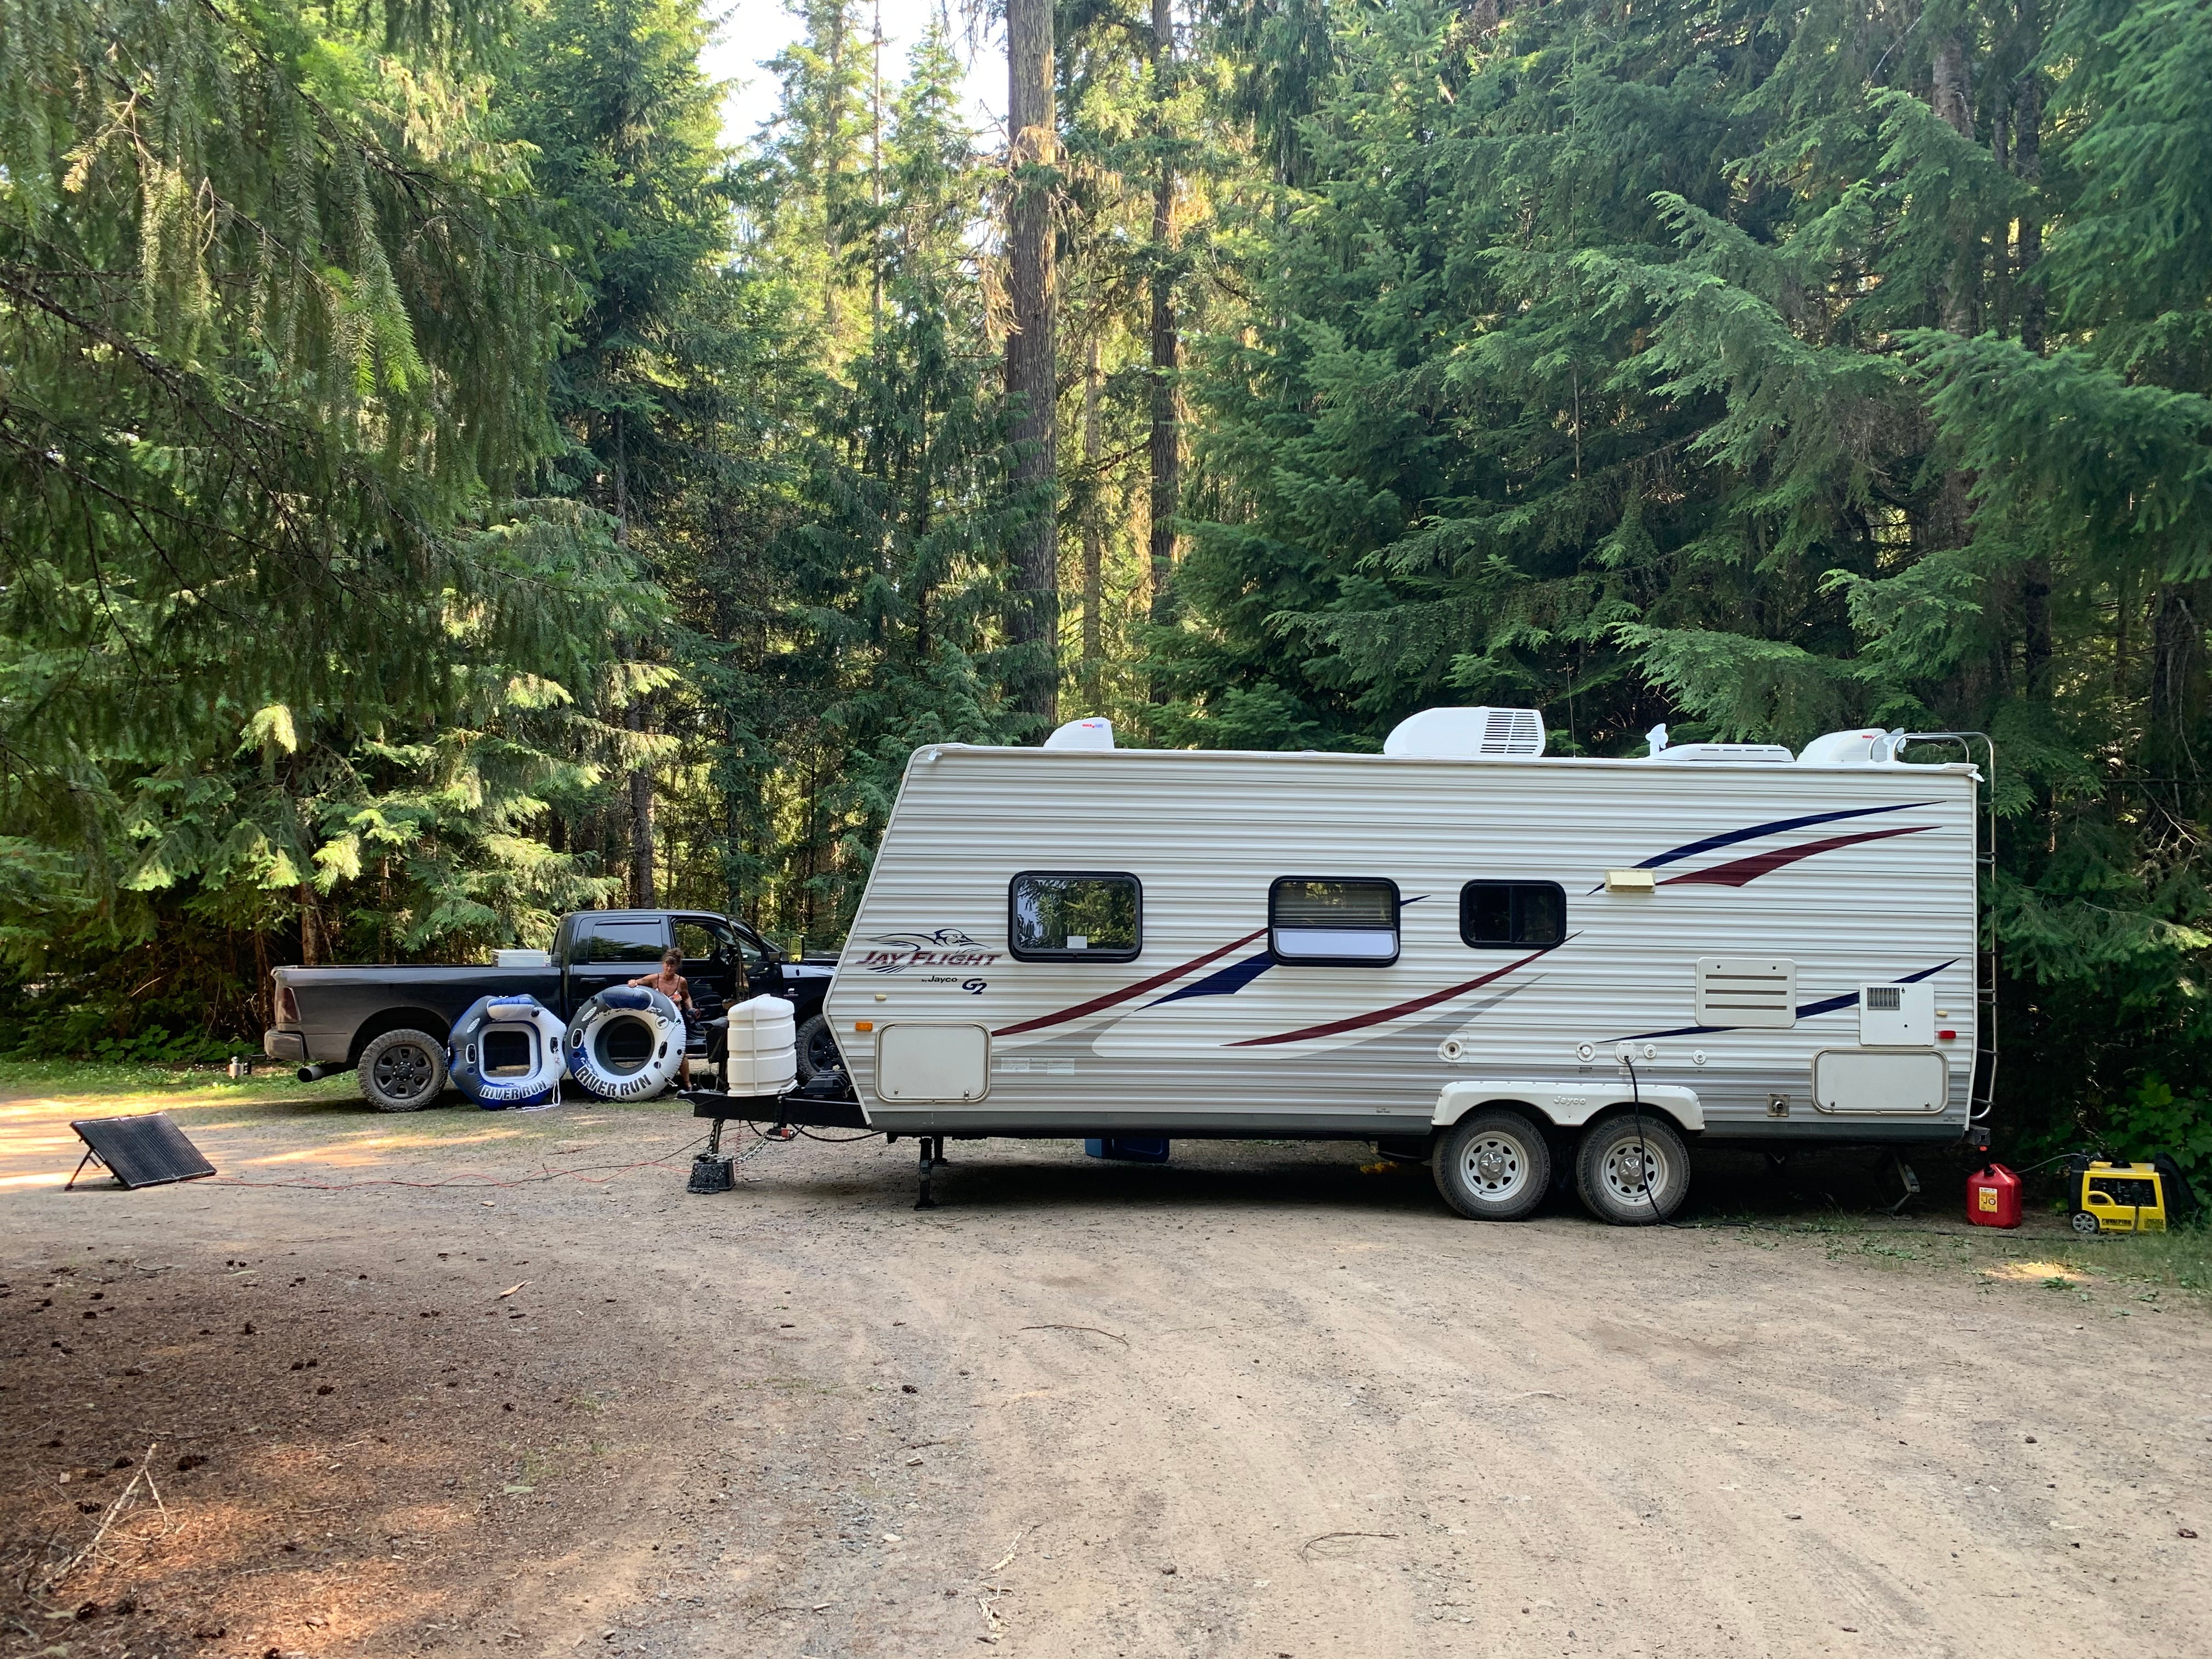 Camper submitted image from Lemono Forebay - 1